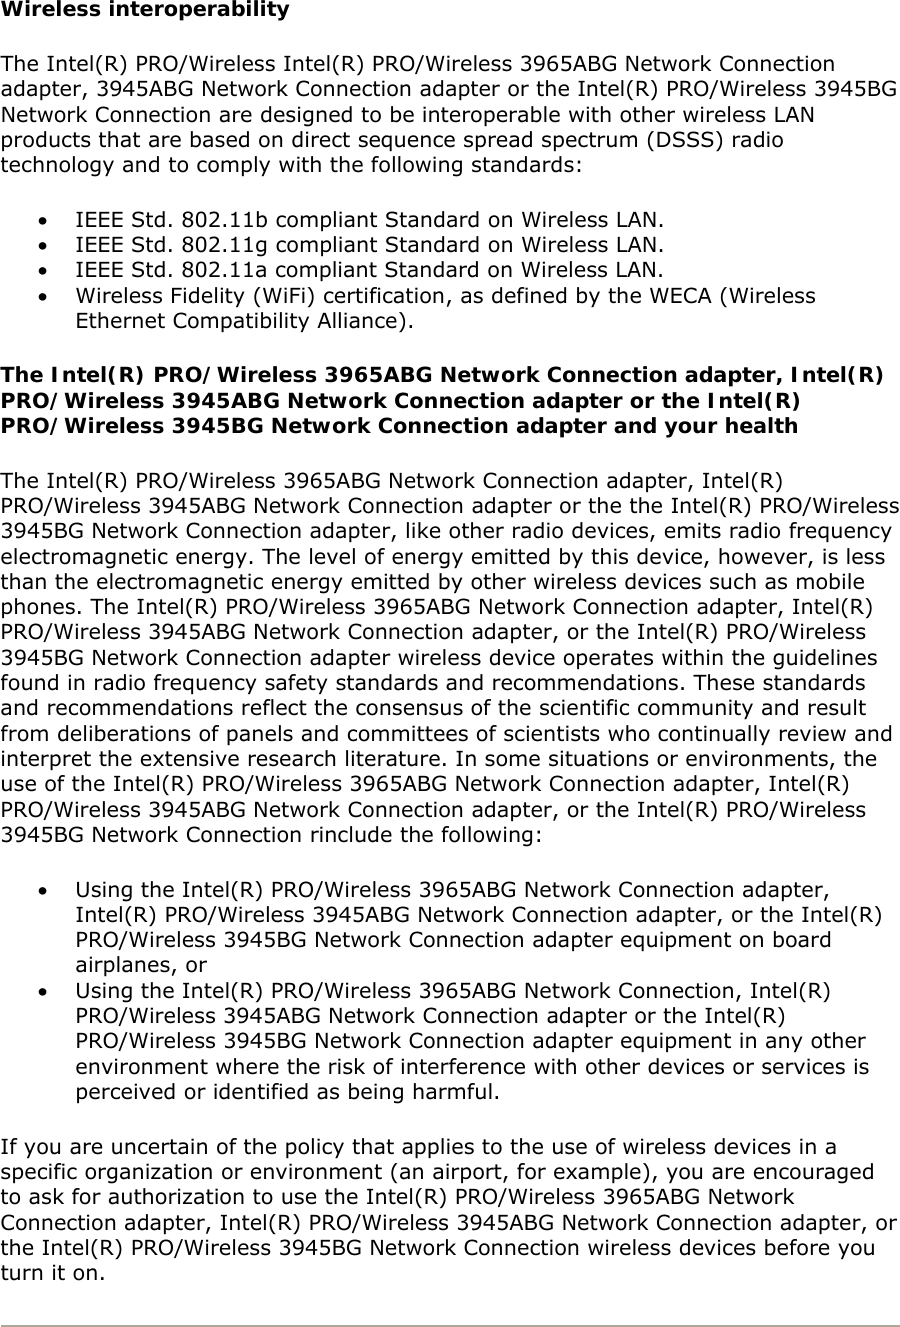 Wireless interoperability The Intel(R) PRO/Wireless Intel(R) PRO/Wireless 3965ABG Network Connection adapter, 3945ABG Network Connection adapter or the Intel(R) PRO/Wireless 3945BG Network Connection are designed to be interoperable with other wireless LAN products that are based on direct sequence spread spectrum (DSSS) radio technology and to comply with the following standards:  • IEEE Std. 802.11b compliant Standard on Wireless LAN.  • IEEE Std. 802.11g compliant Standard on Wireless LAN.  • IEEE Std. 802.11a compliant Standard on Wireless LAN.  • Wireless Fidelity (WiFi) certification, as defined by the WECA (Wireless Ethernet Compatibility Alliance). The Intel(R) PRO/Wireless 3965ABG Network Connection adapter, Intel(R) PRO/Wireless 3945ABG Network Connection adapter or the Intel(R) PRO/Wireless 3945BG Network Connection adapter and your health The Intel(R) PRO/Wireless 3965ABG Network Connection adapter, Intel(R) PRO/Wireless 3945ABG Network Connection adapter or the the Intel(R) PRO/Wireless 3945BG Network Connection adapter, like other radio devices, emits radio frequency electromagnetic energy. The level of energy emitted by this device, however, is less than the electromagnetic energy emitted by other wireless devices such as mobile phones. The Intel(R) PRO/Wireless 3965ABG Network Connection adapter, Intel(R) PRO/Wireless 3945ABG Network Connection adapter, or the Intel(R) PRO/Wireless 3945BG Network Connection adapter wireless device operates within the guidelines found in radio frequency safety standards and recommendations. These standards and recommendations reflect the consensus of the scientific community and result from deliberations of panels and committees of scientists who continually review and interpret the extensive research literature. In some situations or environments, the use of the Intel(R) PRO/Wireless 3965ABG Network Connection adapter, Intel(R) PRO/Wireless 3945ABG Network Connection adapter, or the Intel(R) PRO/Wireless 3945BG Network Connection rinclude the following:  • Using the Intel(R) PRO/Wireless 3965ABG Network Connection adapter, Intel(R) PRO/Wireless 3945ABG Network Connection adapter, or the Intel(R) PRO/Wireless 3945BG Network Connection adapter equipment on board airplanes, or  • Using the Intel(R) PRO/Wireless 3965ABG Network Connection, Intel(R) PRO/Wireless 3945ABG Network Connection adapter or the Intel(R) PRO/Wireless 3945BG Network Connection adapter equipment in any other environment where the risk of interference with other devices or services is perceived or identified as being harmful. If you are uncertain of the policy that applies to the use of wireless devices in a specific organization or environment (an airport, for example), you are encouraged to ask for authorization to use the Intel(R) PRO/Wireless 3965ABG Network Connection adapter, Intel(R) PRO/Wireless 3945ABG Network Connection adapter, or the Intel(R) PRO/Wireless 3945BG Network Connection wireless devices before you turn it on.   